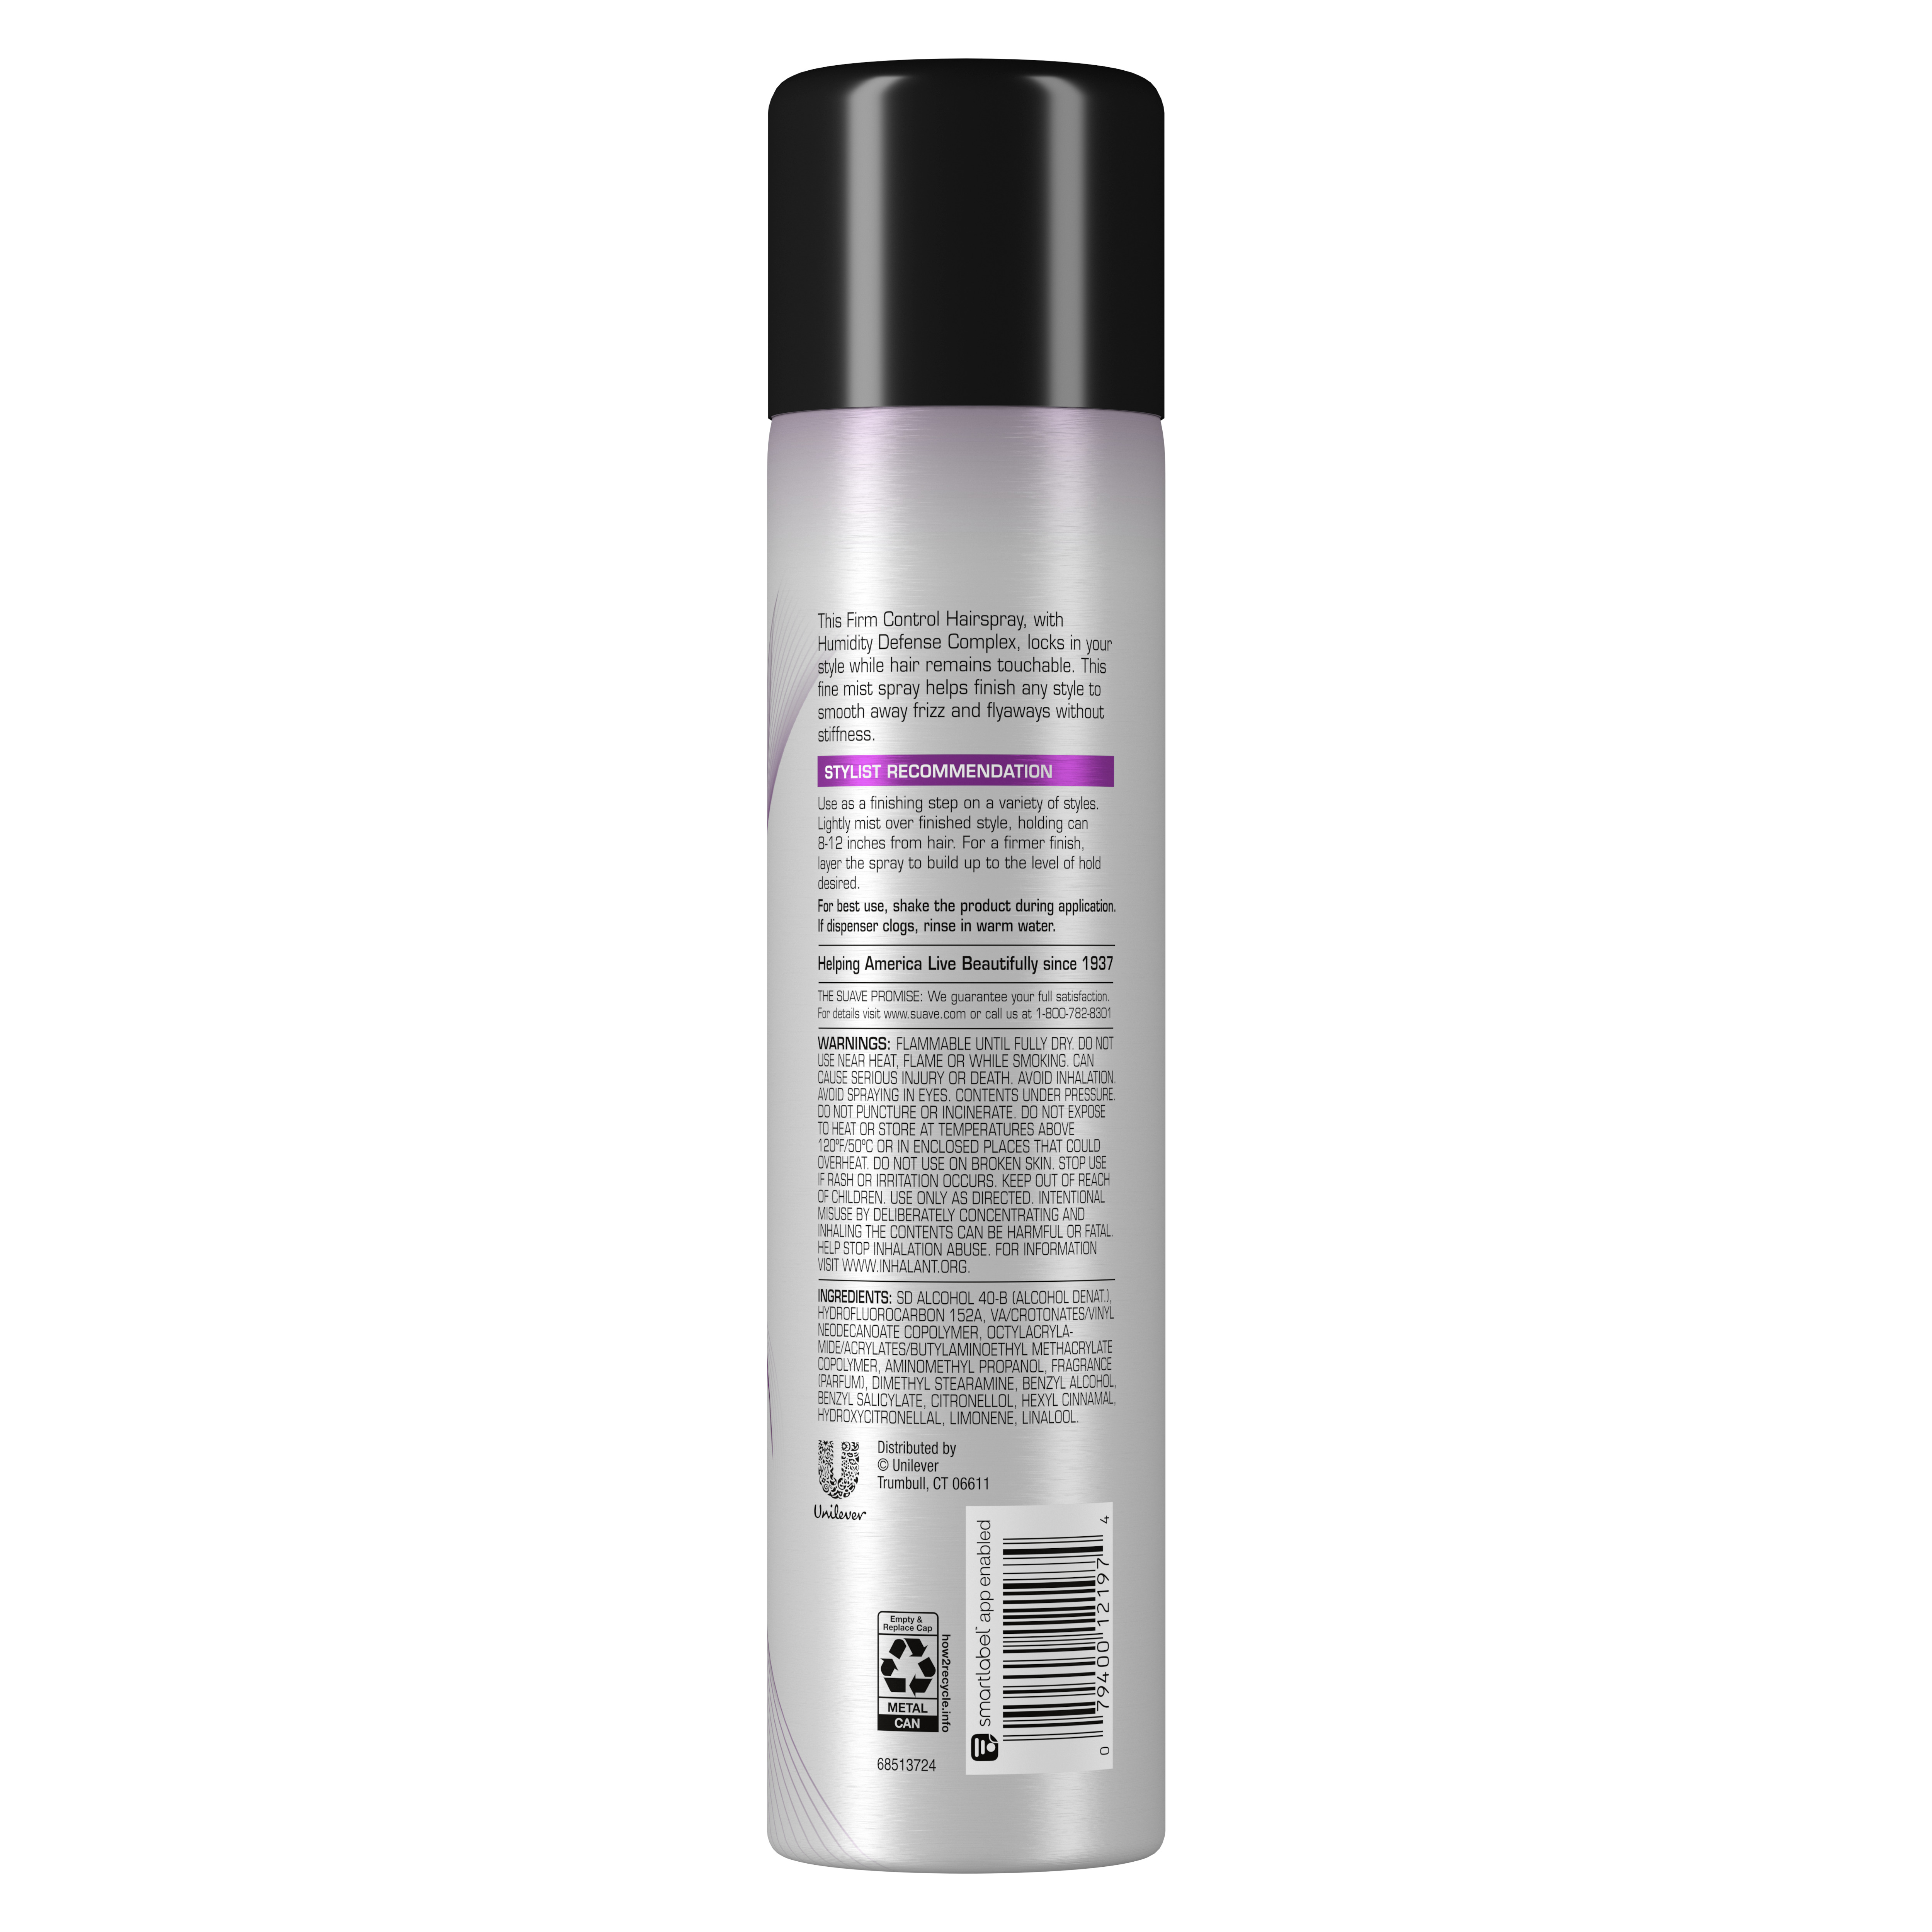 Suave Professionals Hairspray Firm Control Finishing and Hair Styling Hairspray&nbsp;9.4 oz&nbsp; - image 3 of 10